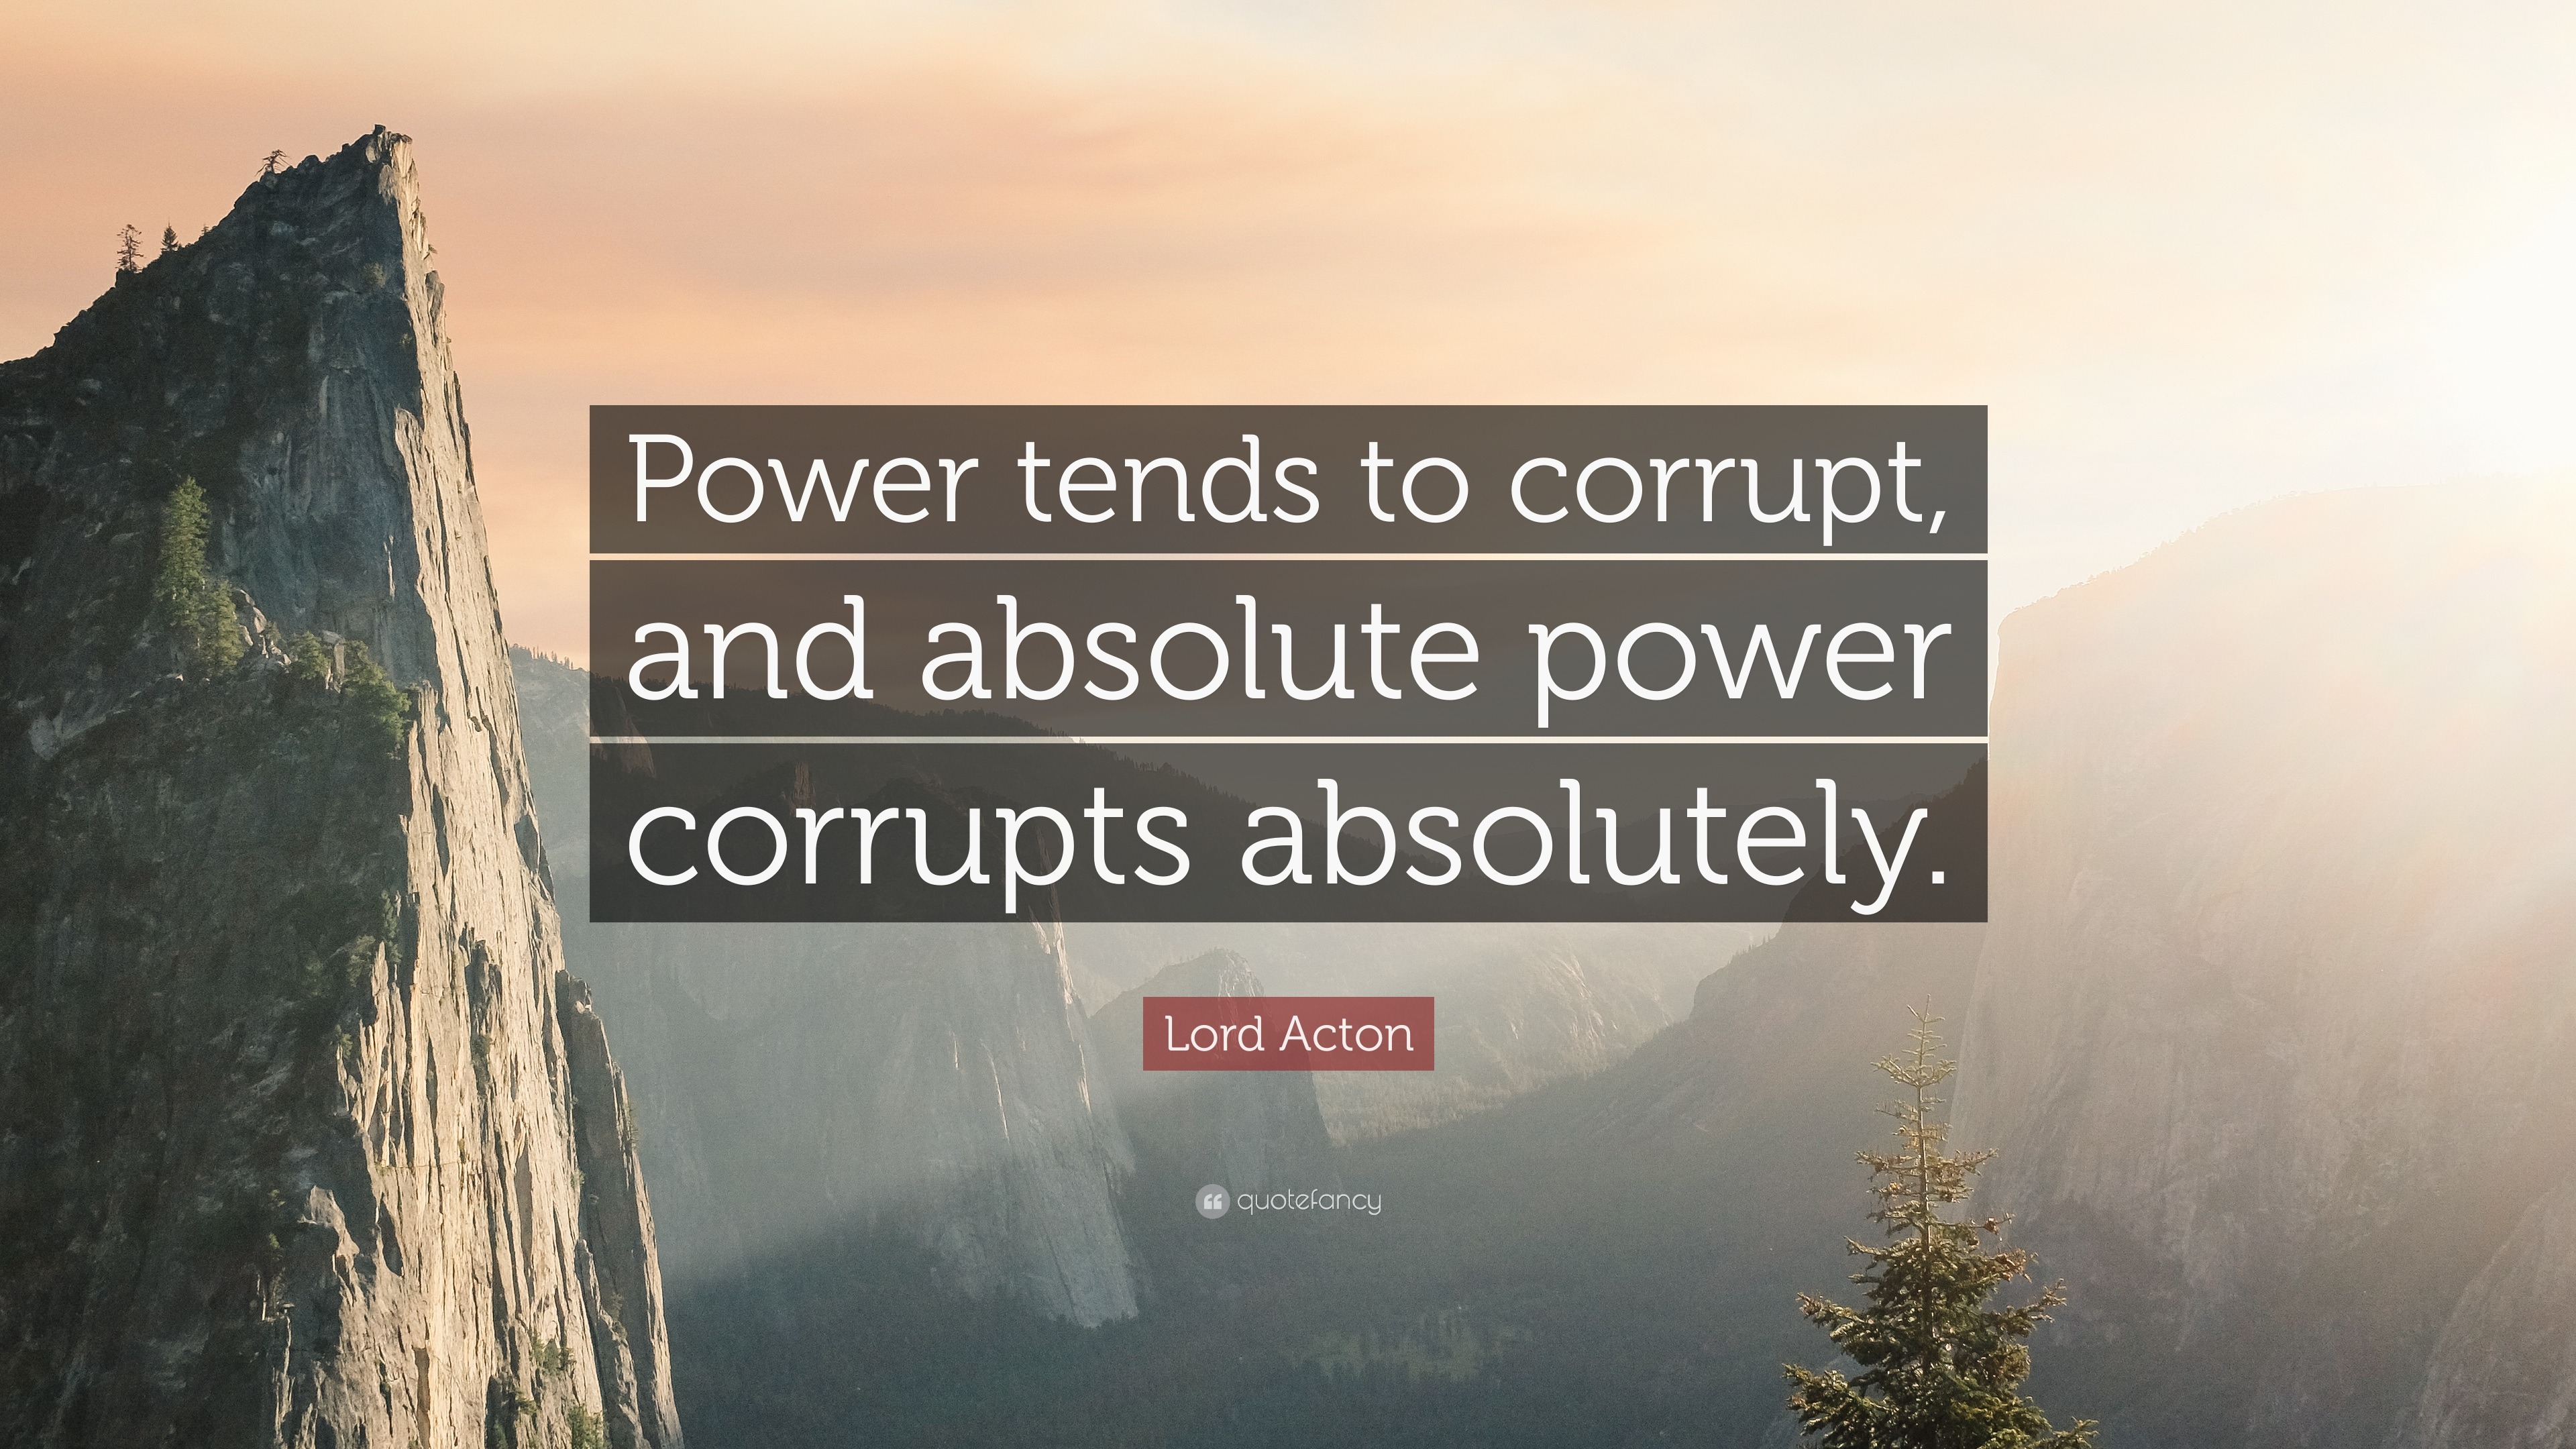 power tends to corrupt and absolute power corrupts absolutely